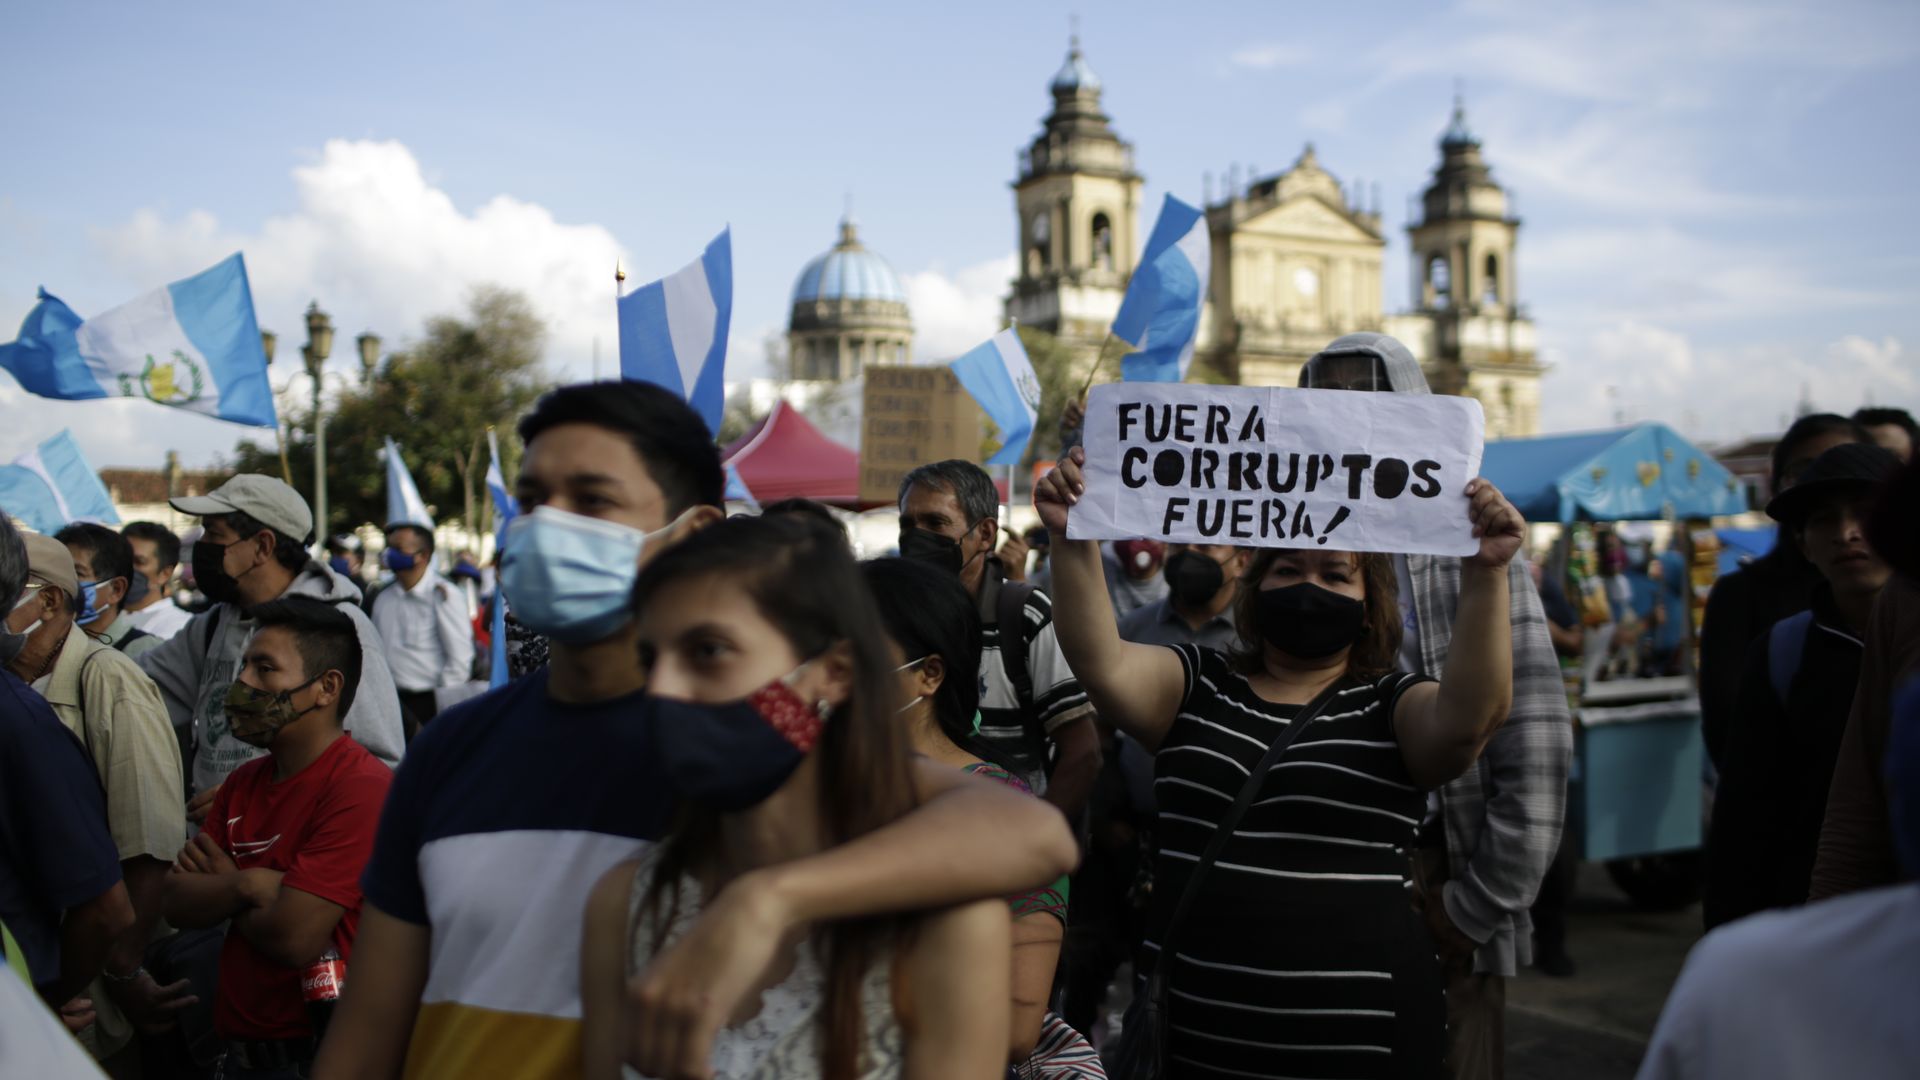 A couple at a protest stands in front of a sign in Spanish in front of a colonial church in Guatemala City.